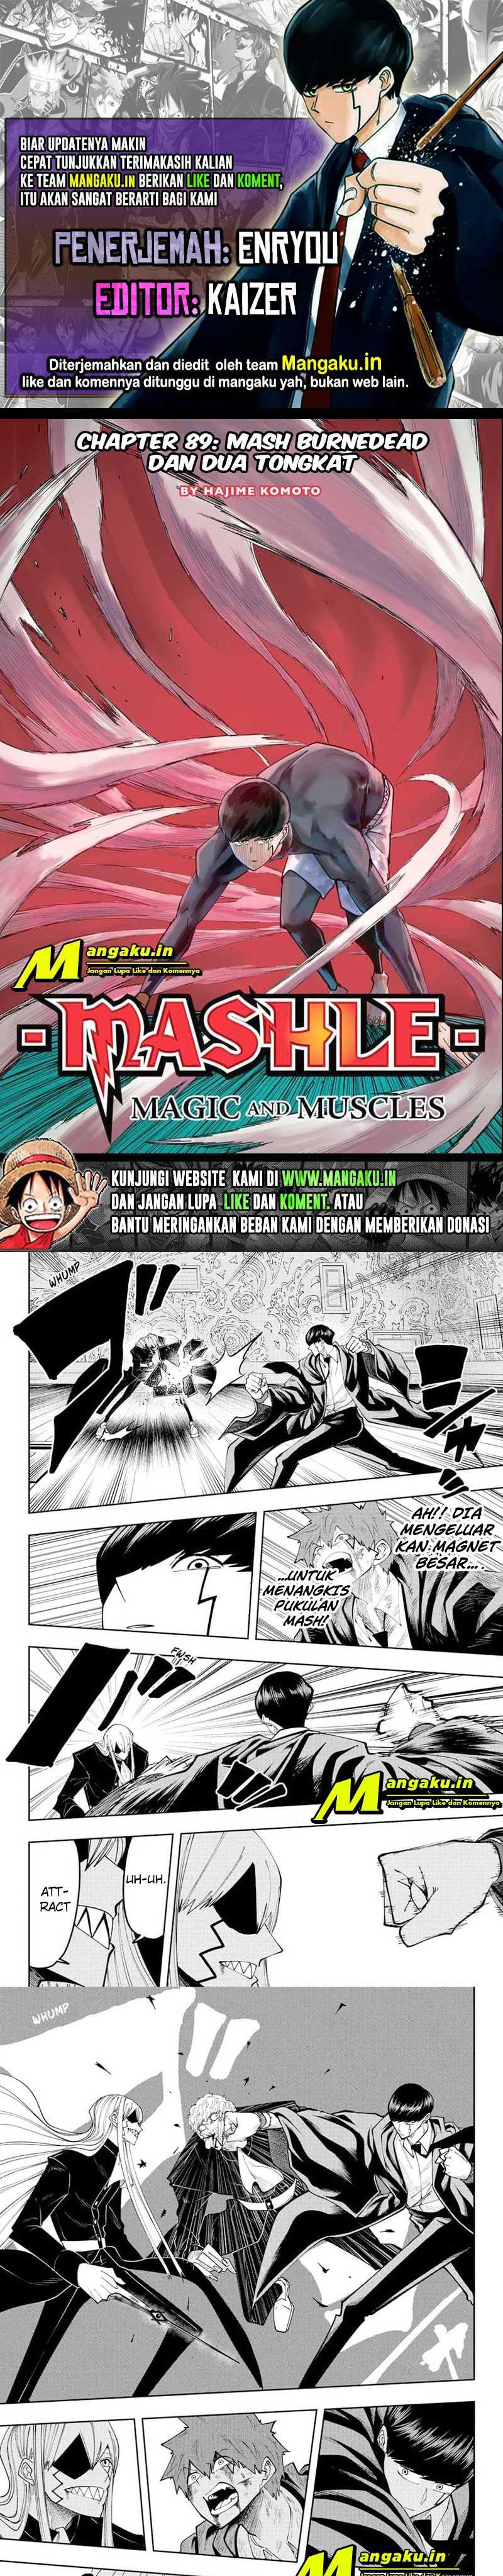 Mashle: Magic and Muscles: Chapter 89 - Page 1